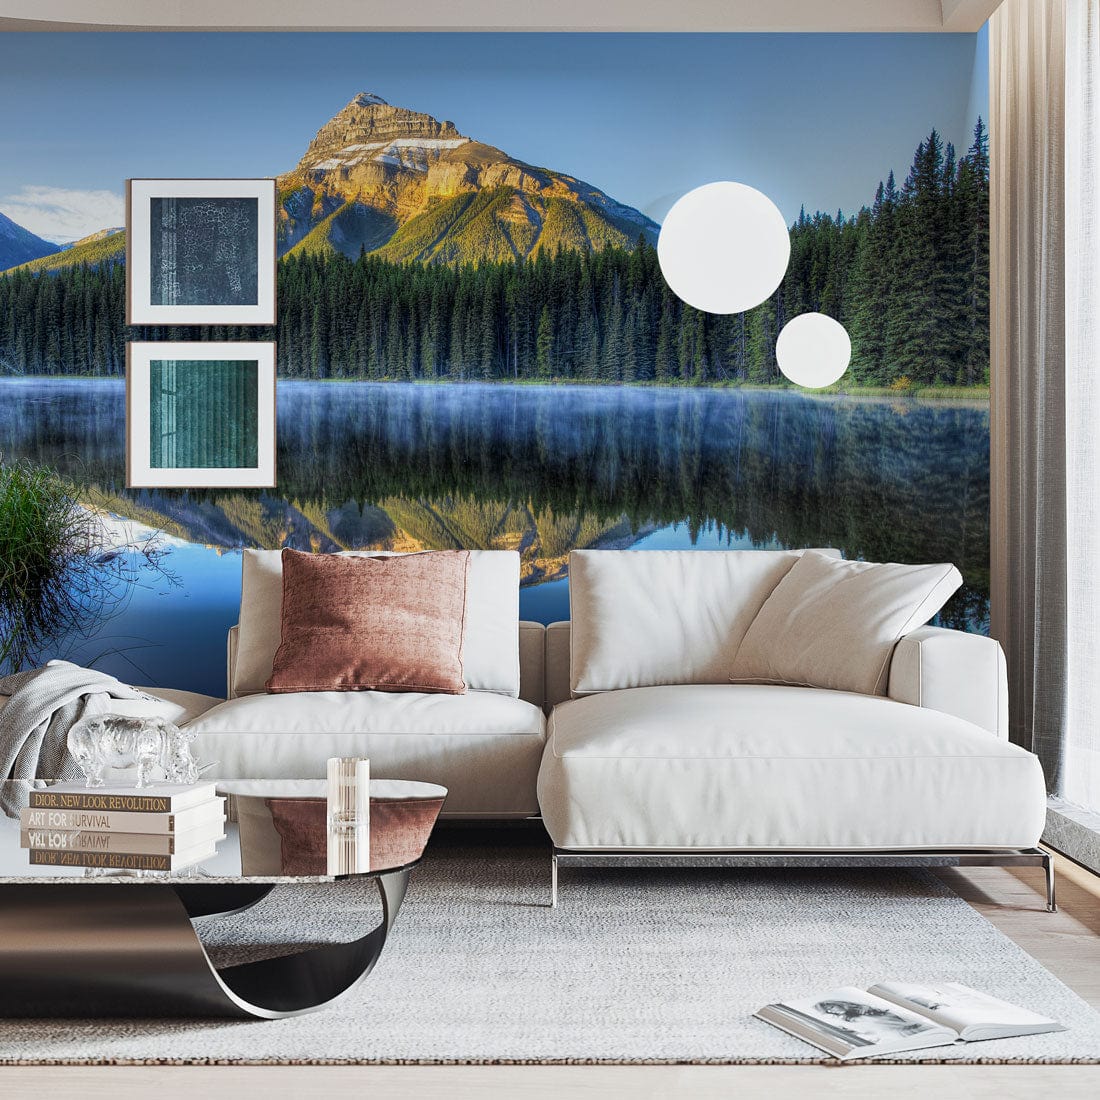 Wallpaper Mural for the Living Room Decor Featuring Inverted Mountain Scenes from Around the World